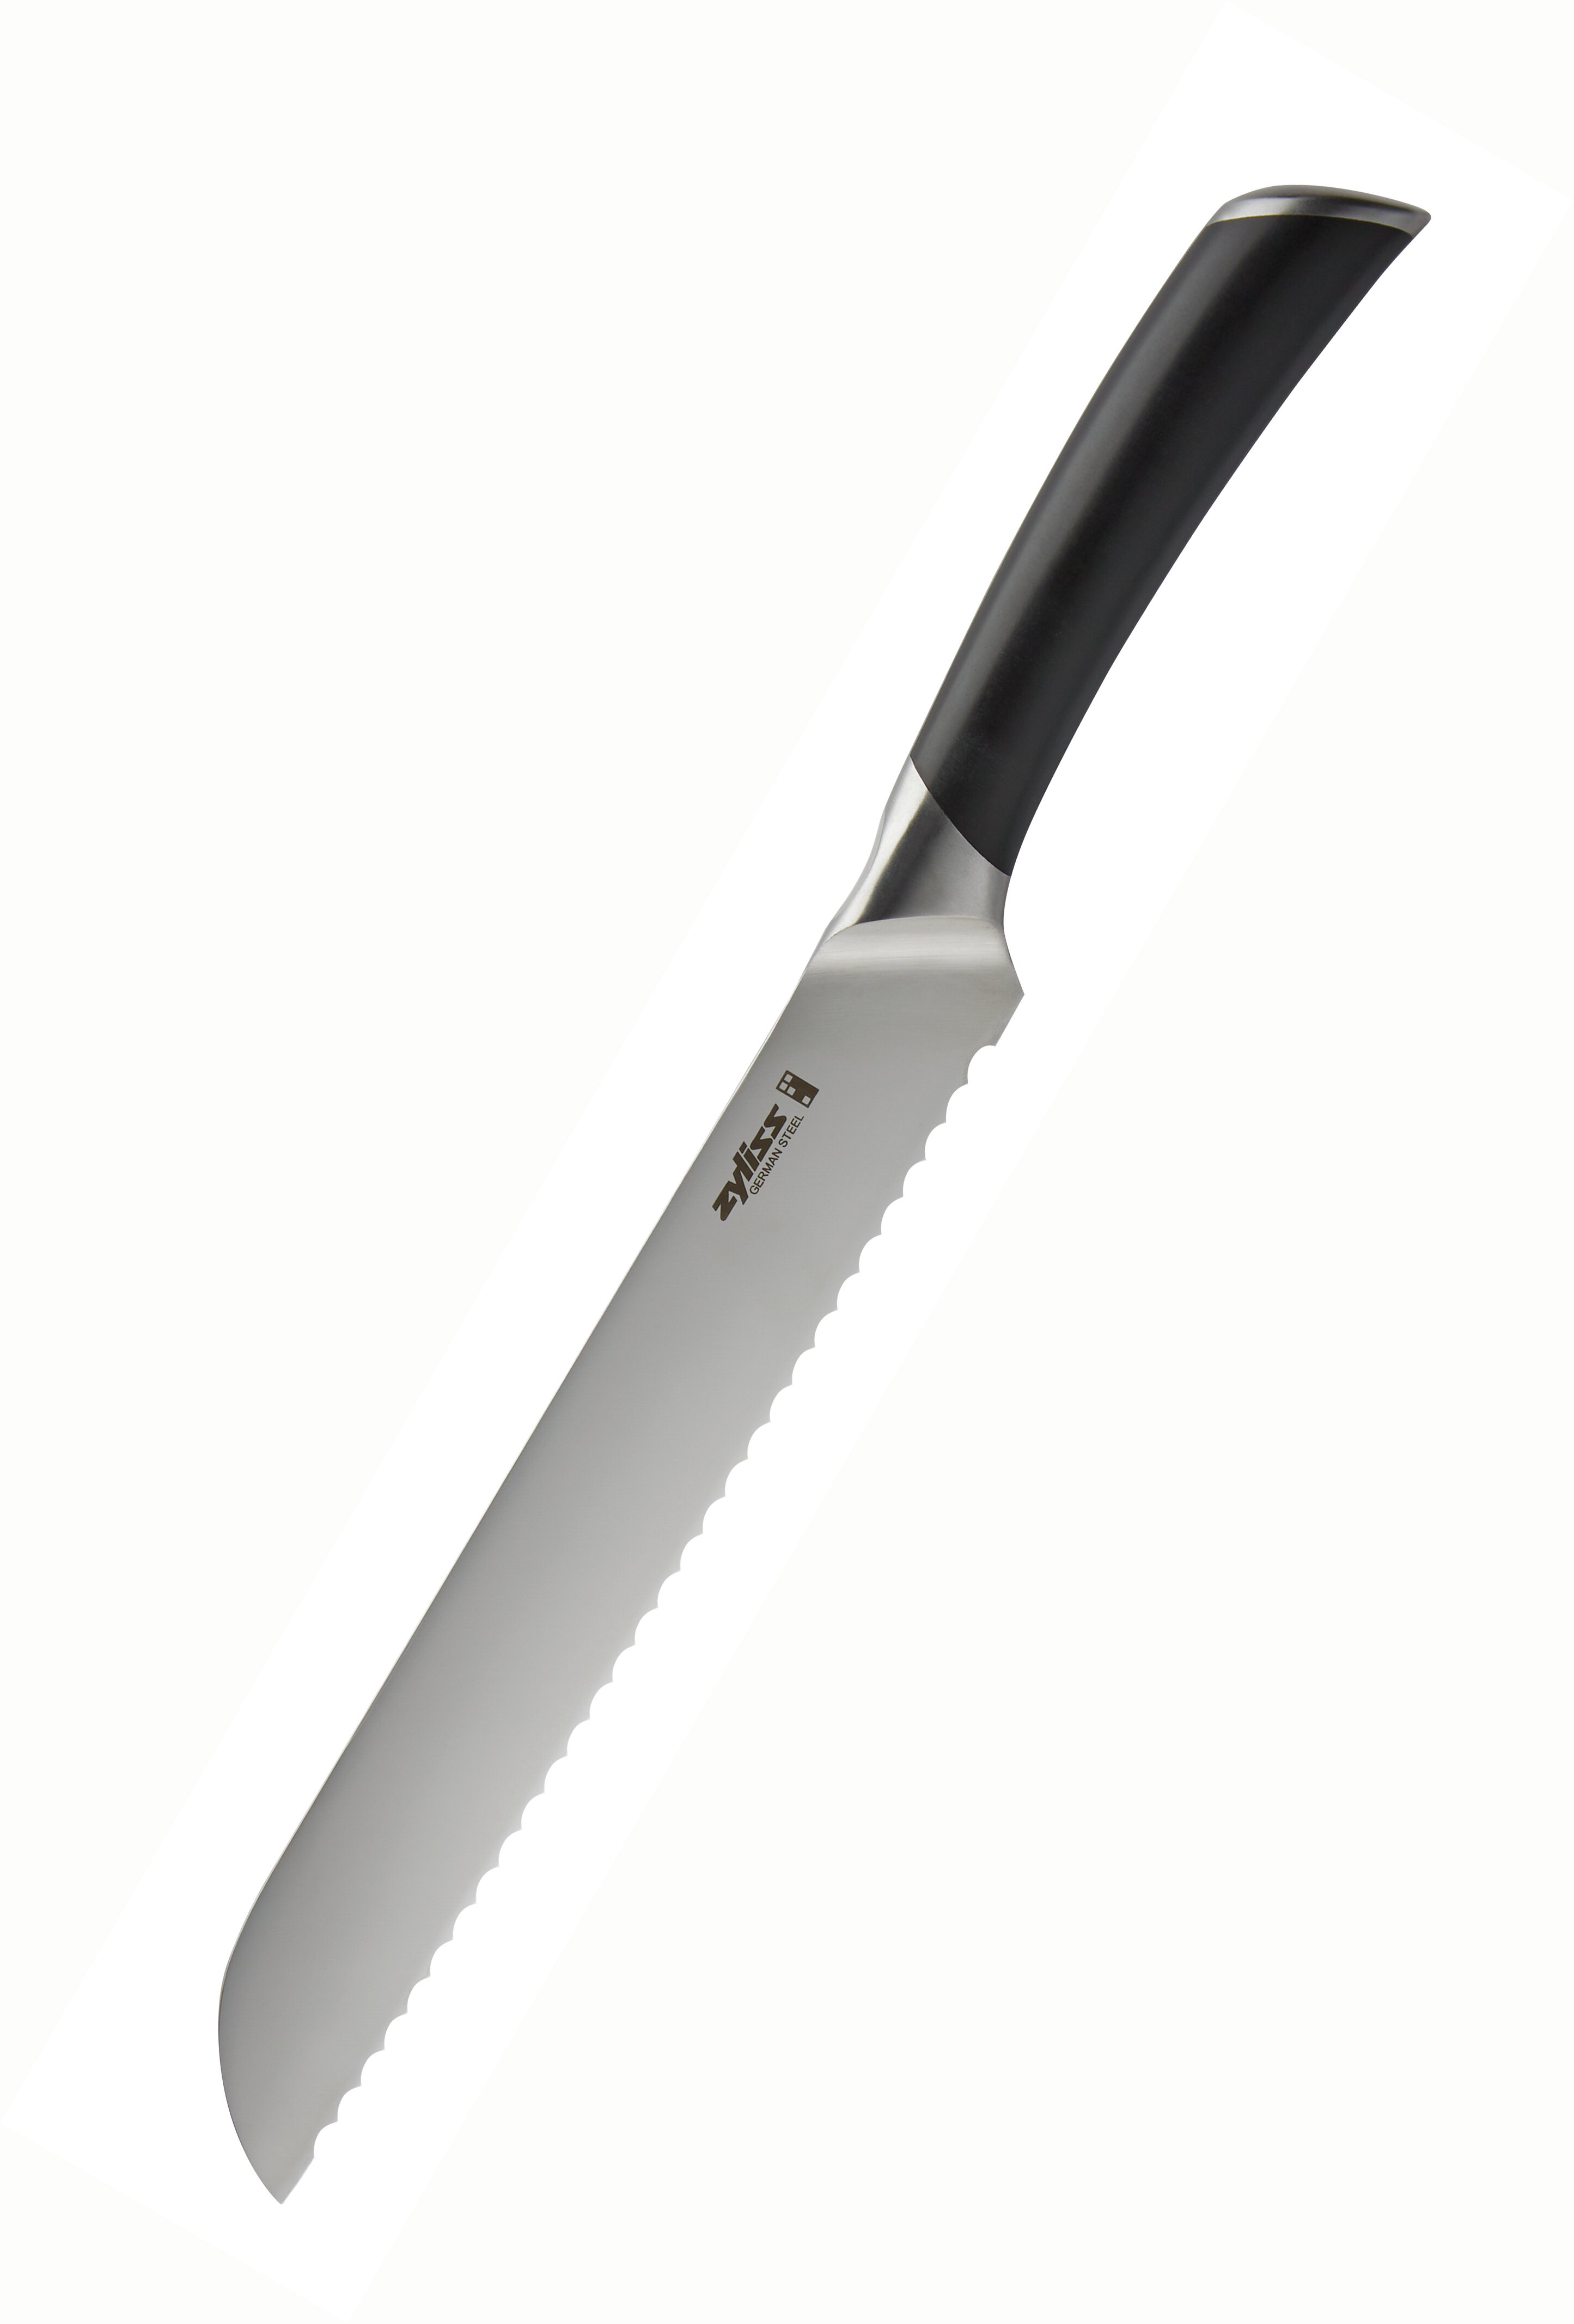 Zyliss Paring Knives, Cutlery, Premium Forged Cutlery, Classic Cutlery, Comfort Cutlery